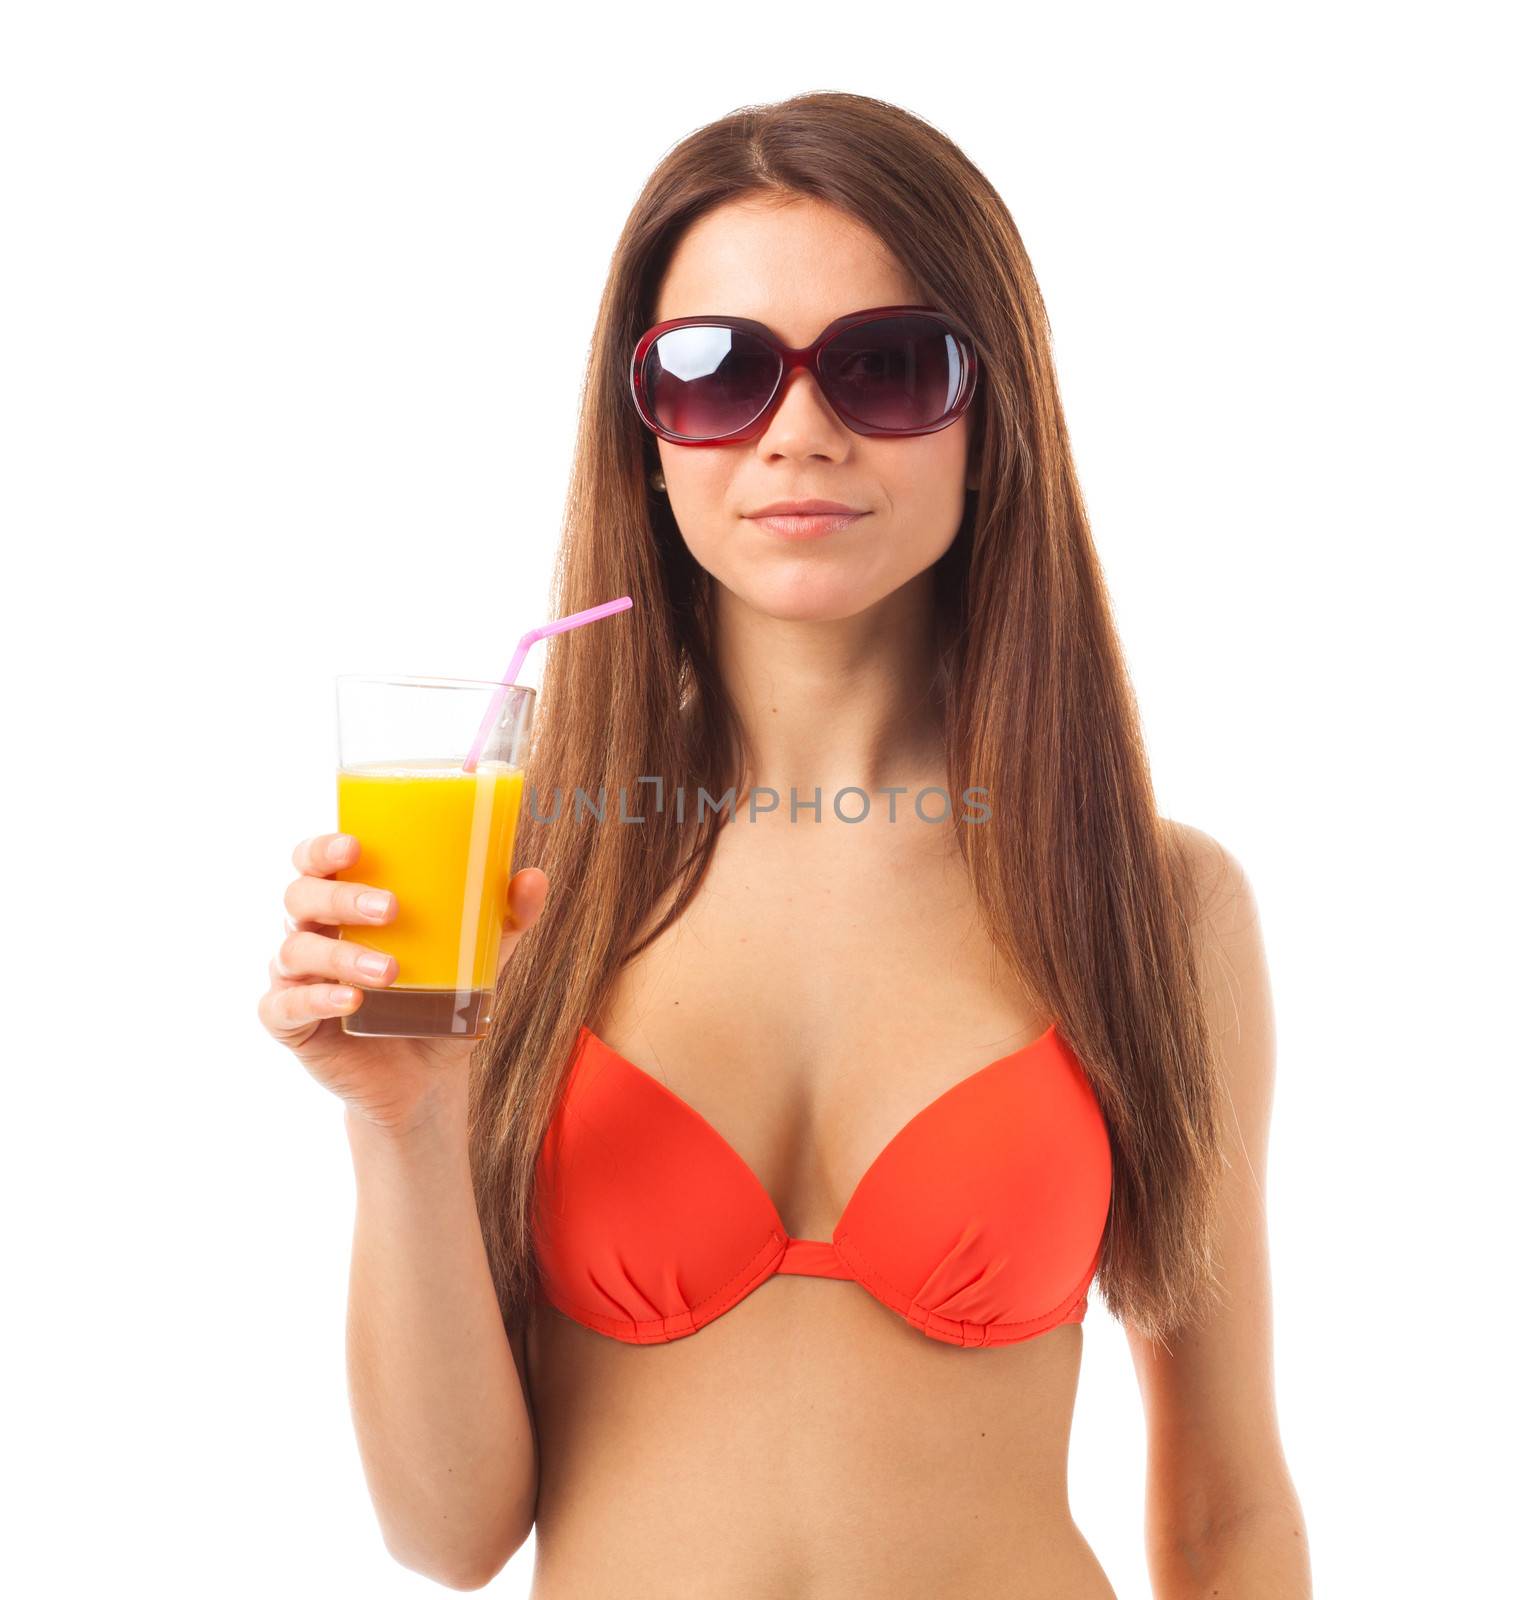 Young beauty in summer
Woman with sunglasses drinks orange juice in summer, isolated on white